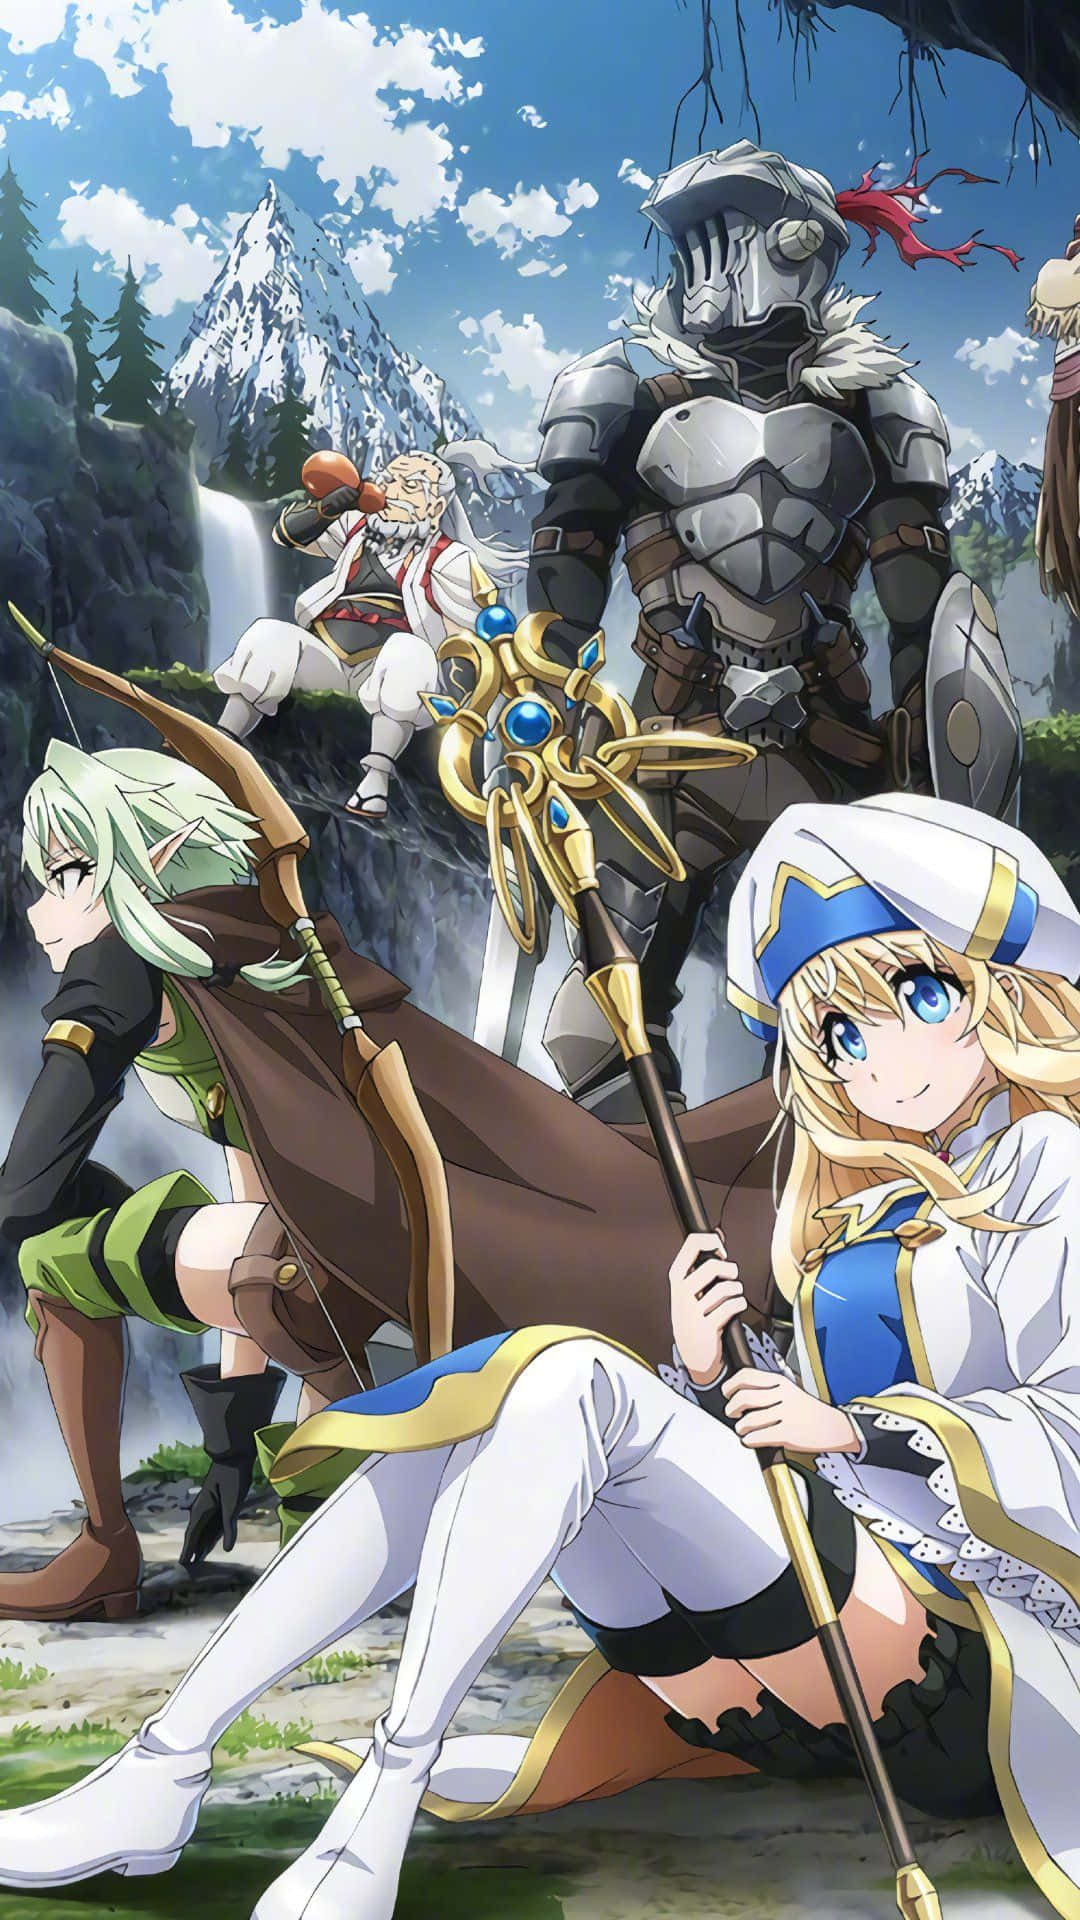 Goblin Slayer standing strong in the face of adversity